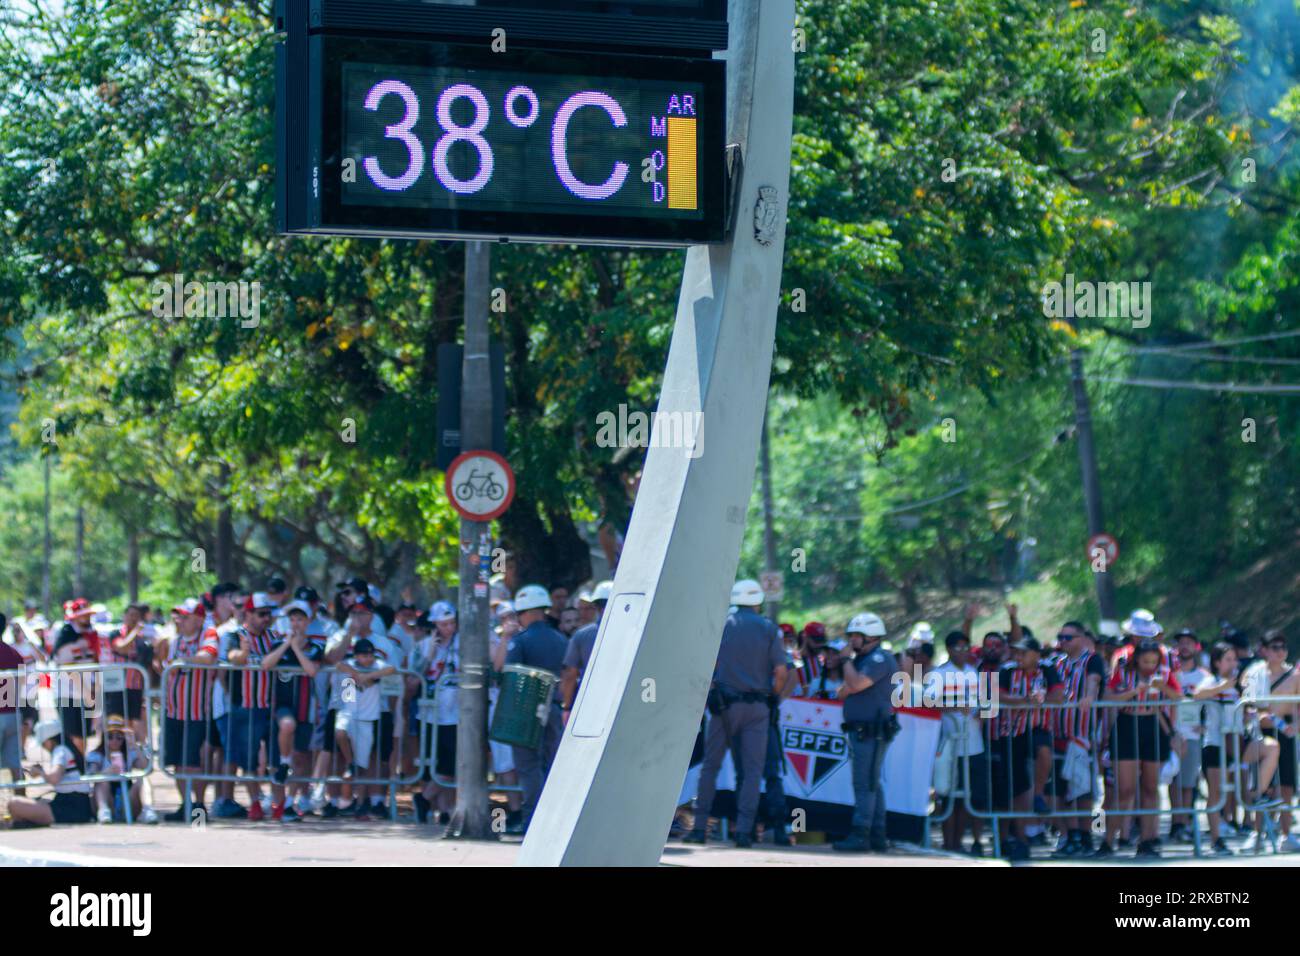 https://c8.alamy.com/comp/2RXBTN2/so-paulo-sp-24092023-so-paulo-x-flamengo-thermometer-shows-38c-before-the-match-between-so-paulo-fc-x-flamengo-valid-for-the-second-leg-of-the-2023-copa-do-brasil-final-and-held-at-the-morumbi-stadium-in-so-paulo-sp-photo-maurcio-rummensfotoarena-credit-foto-arena-ltdaalamy-live-news-2RXBTN2.jpg